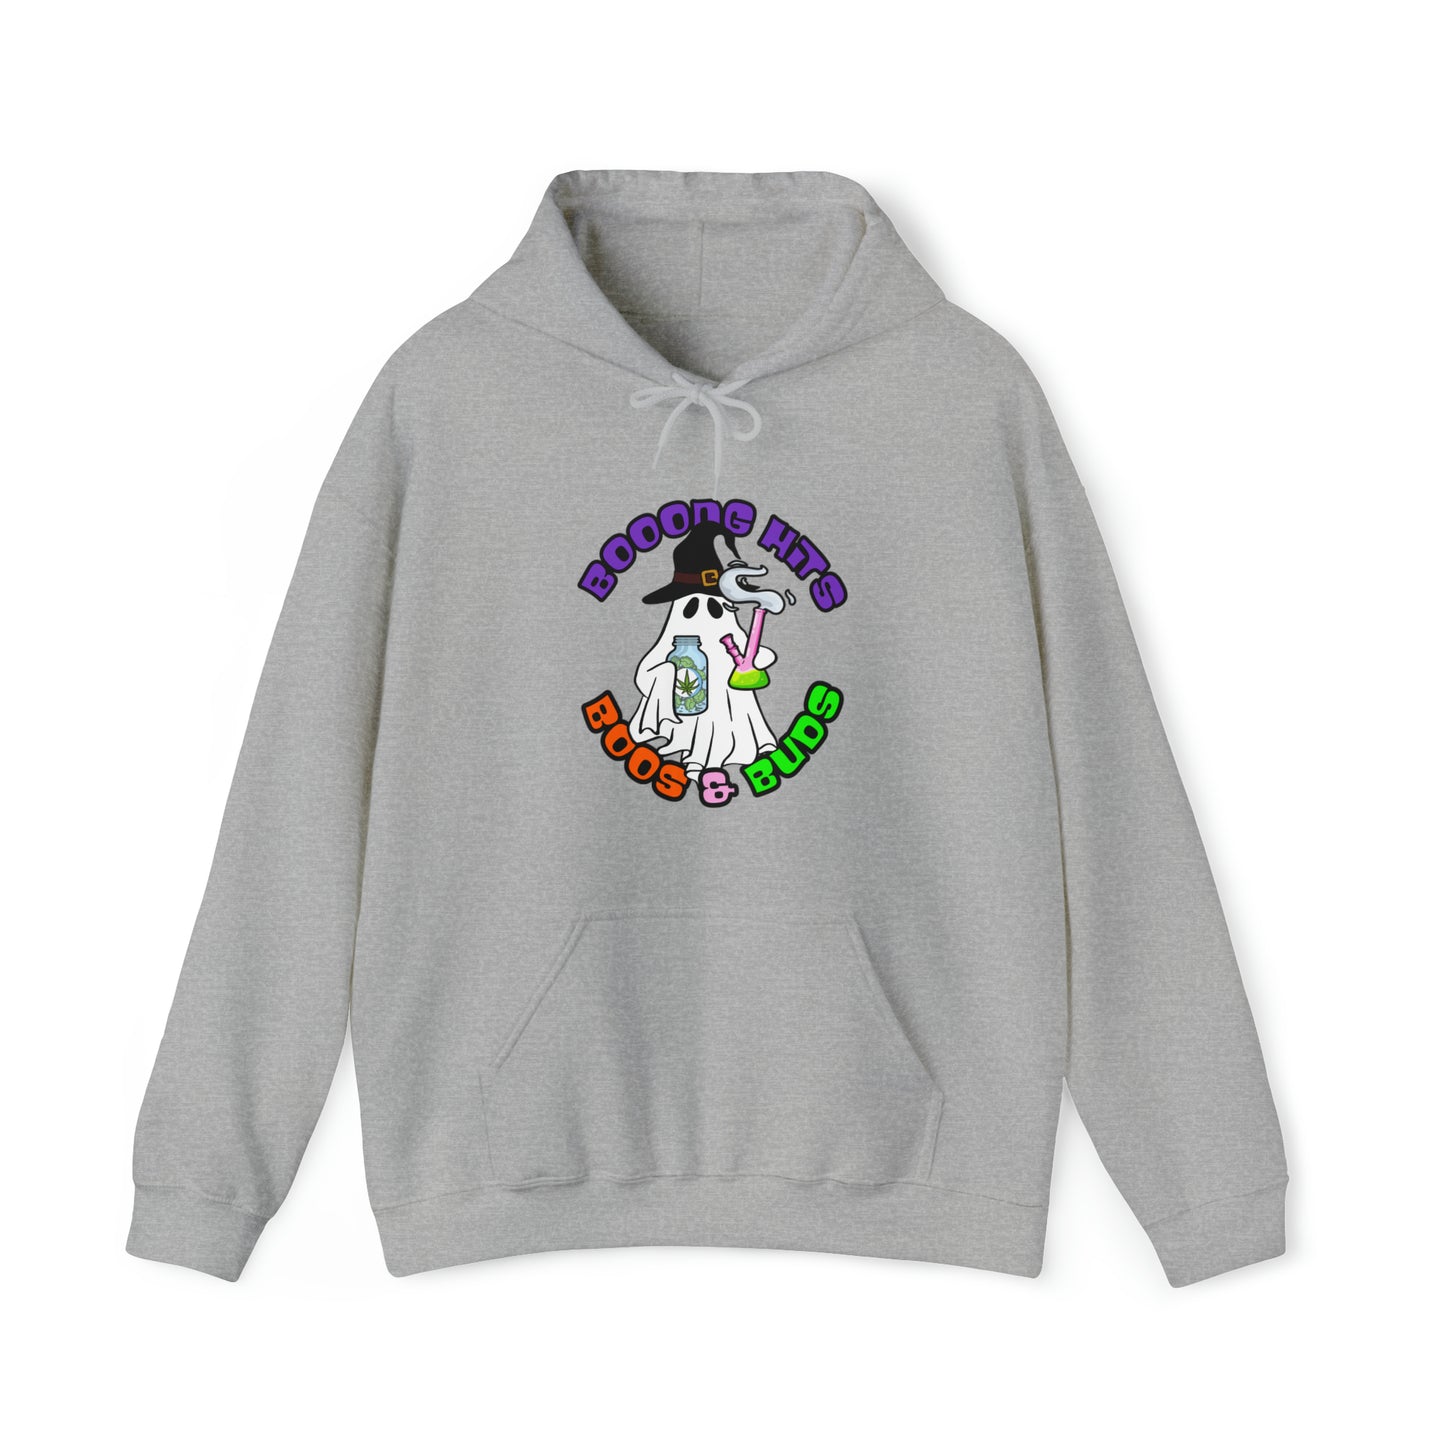 Sports Gray Booong Hits Boos & Buds Ghost Cannabis Hoodie